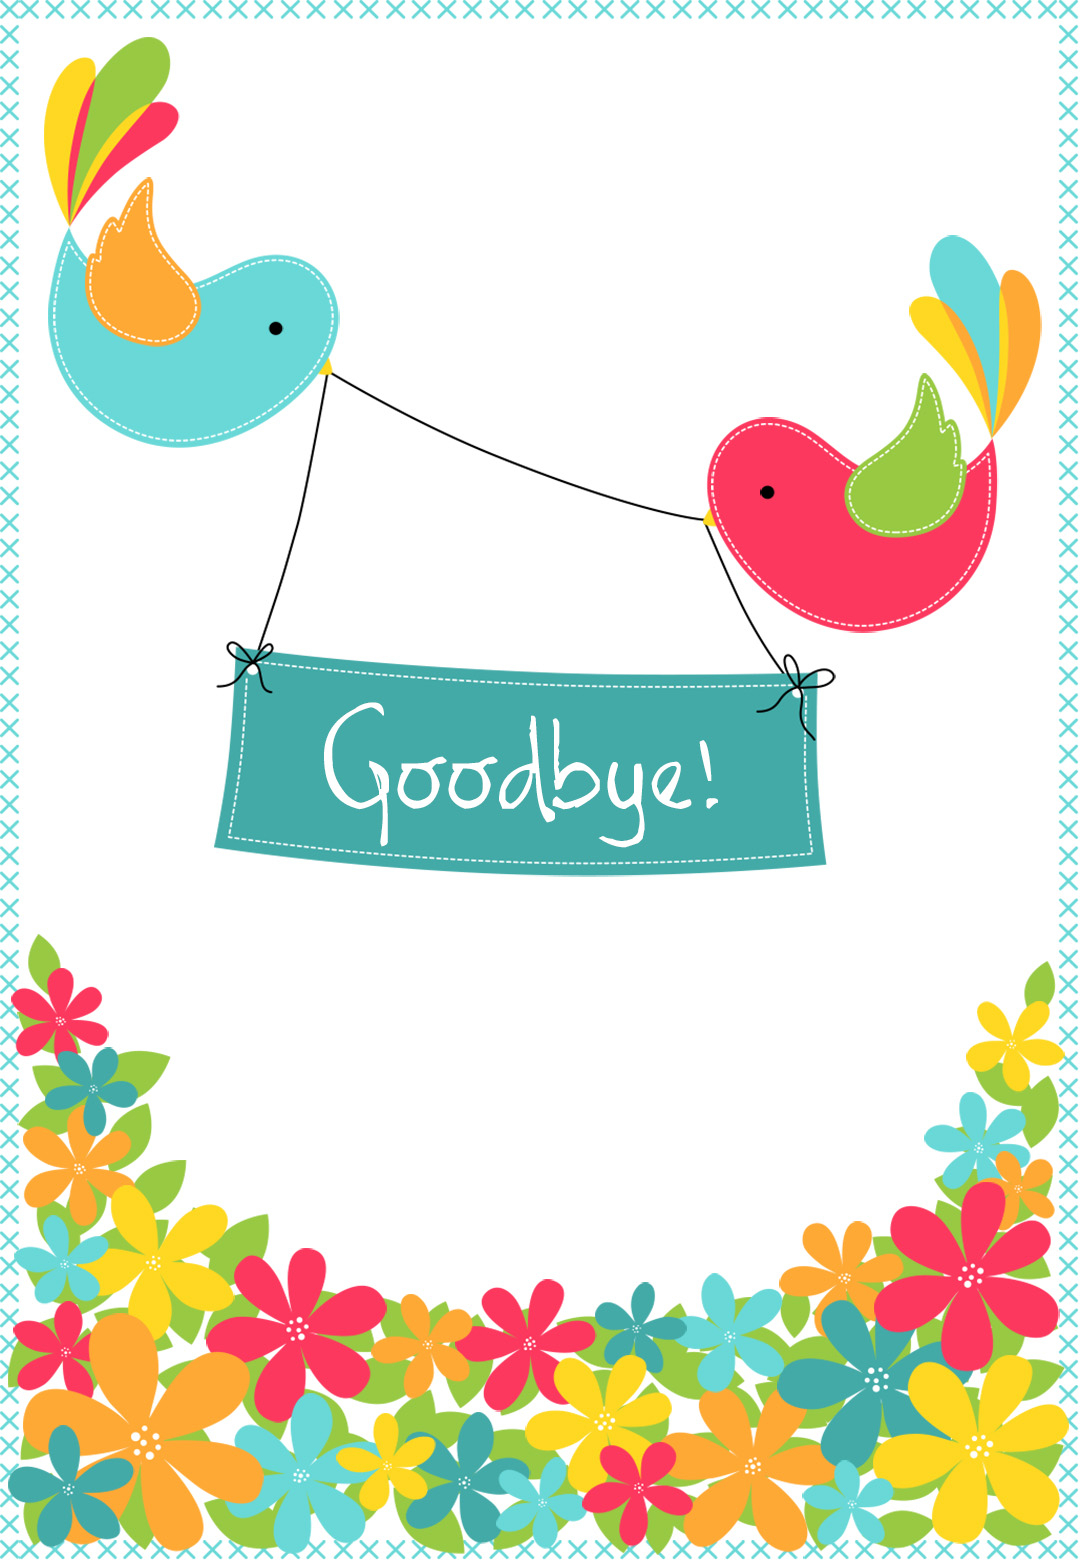 Goodbye From Your Colleagues – Good Luck Card (Free Within Good Luck Card Templates